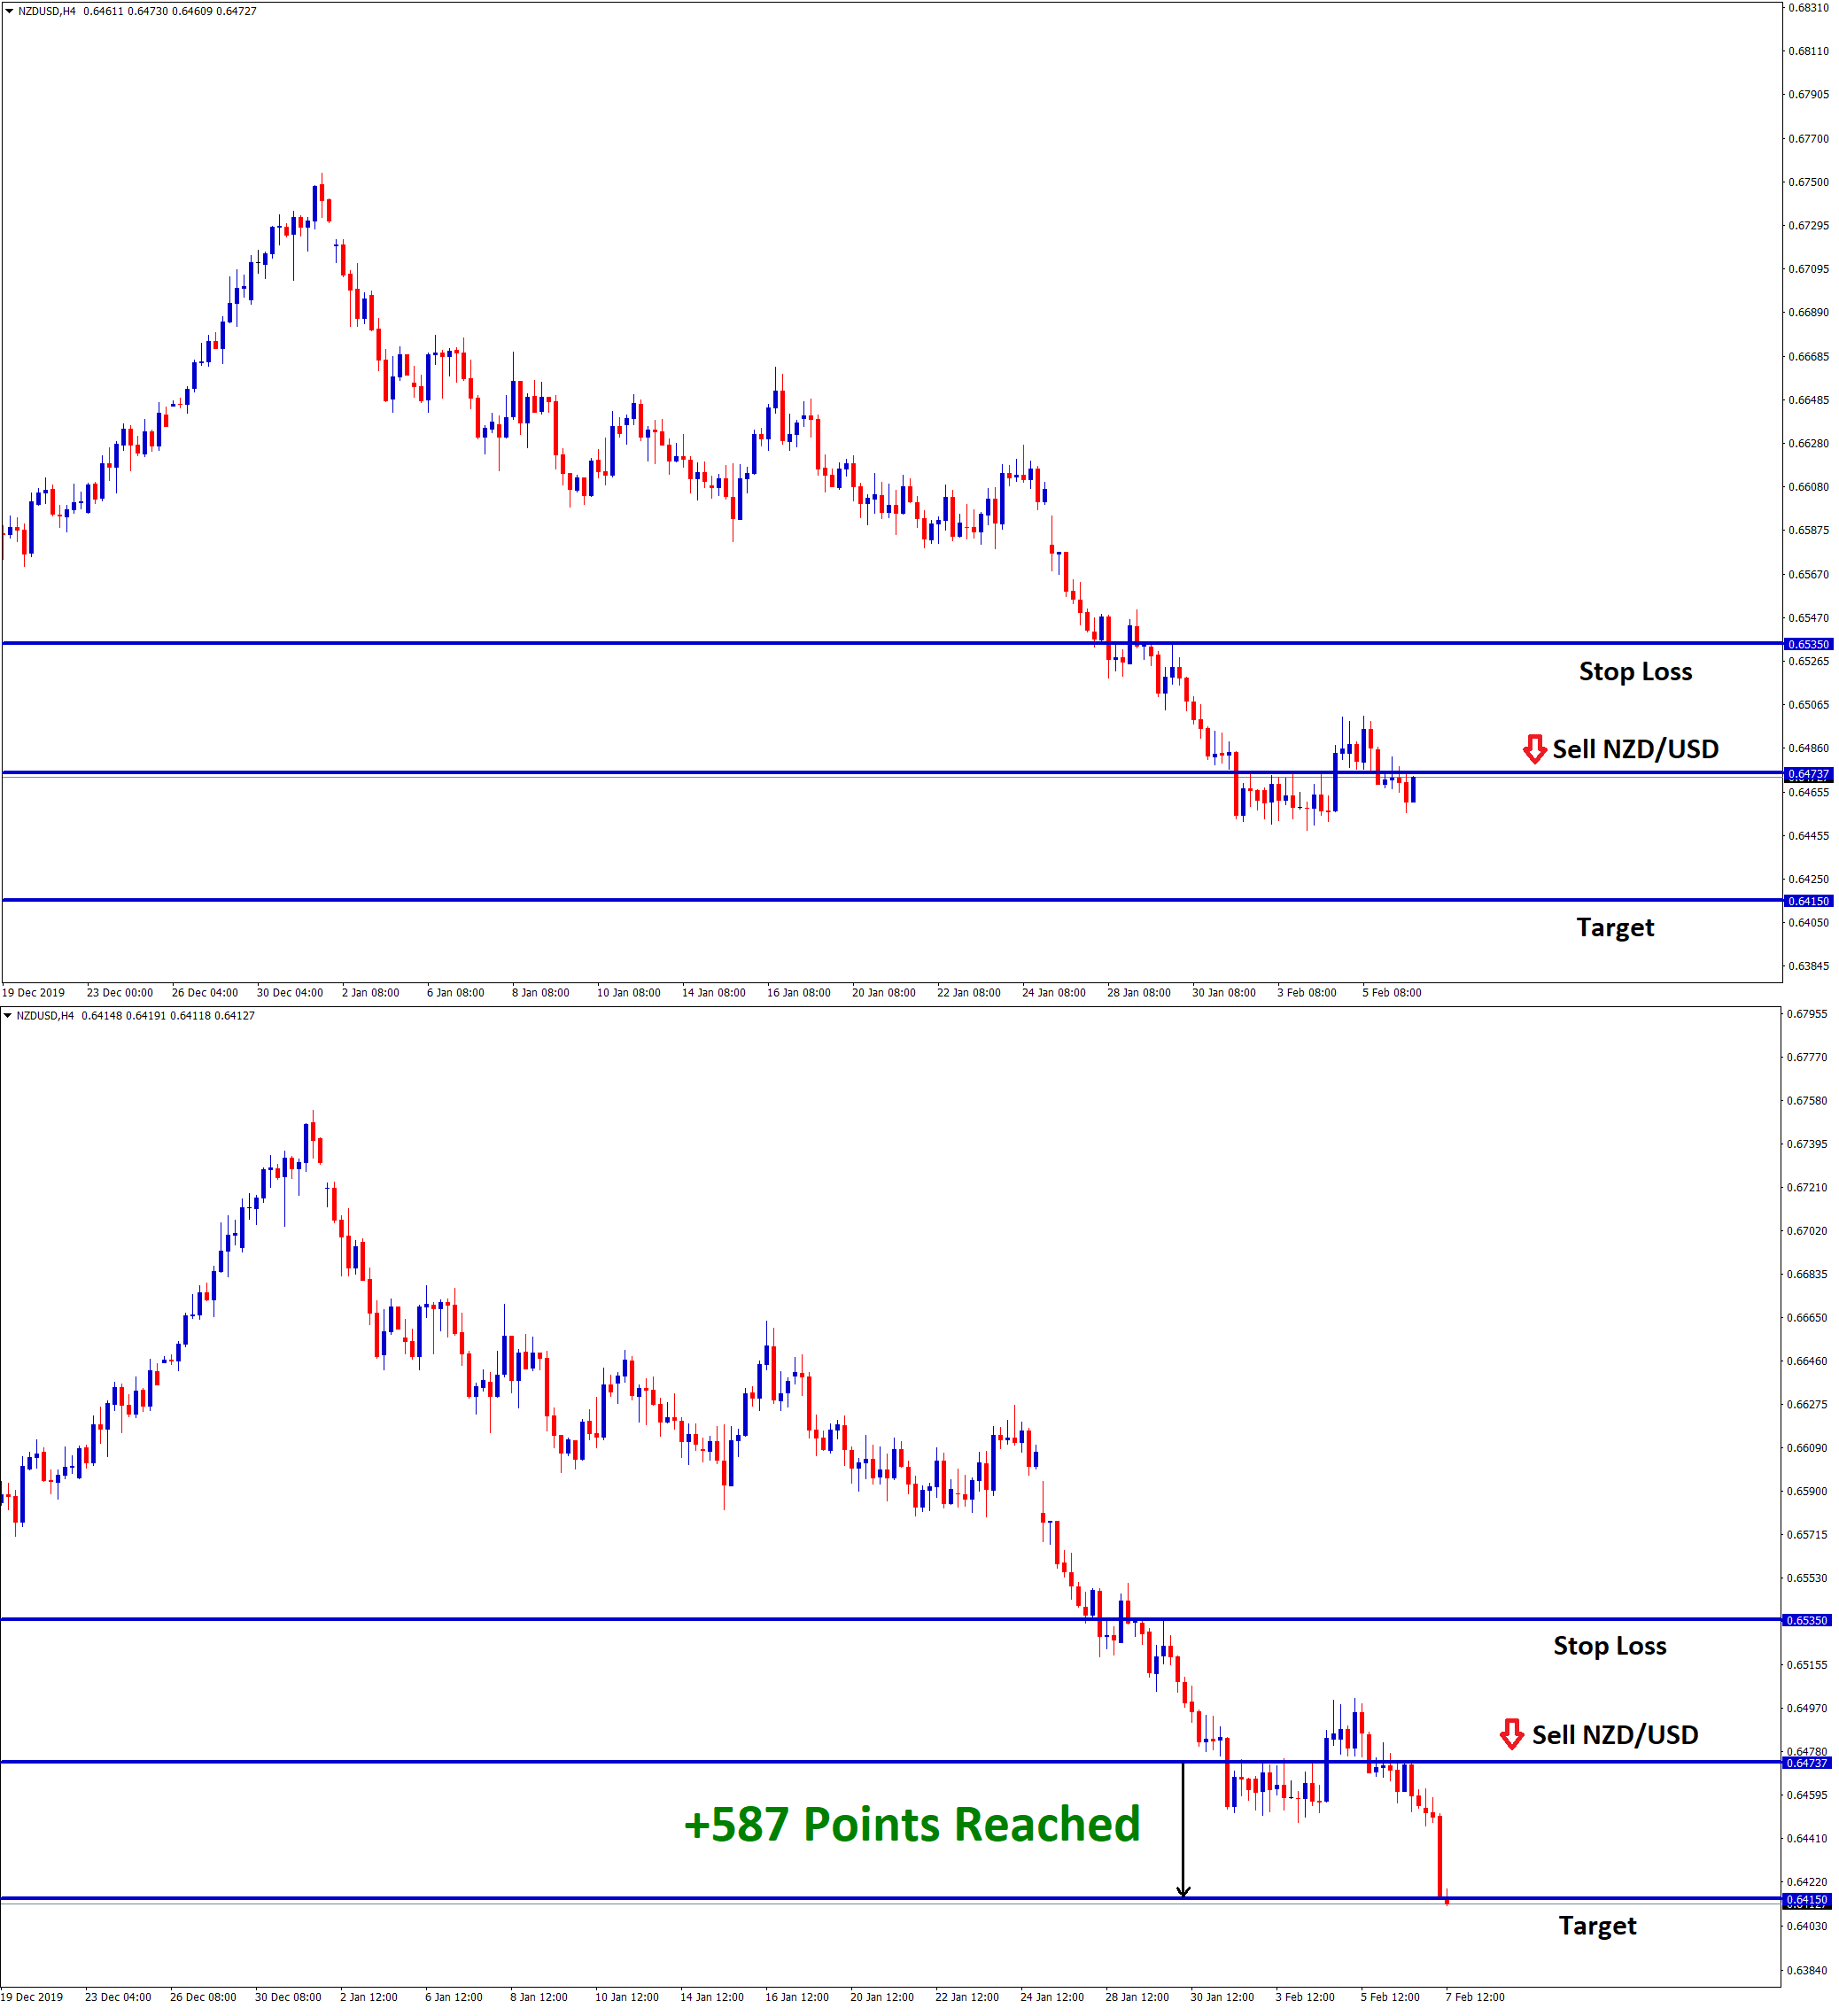 nzd usd breakout happened at the downtrend